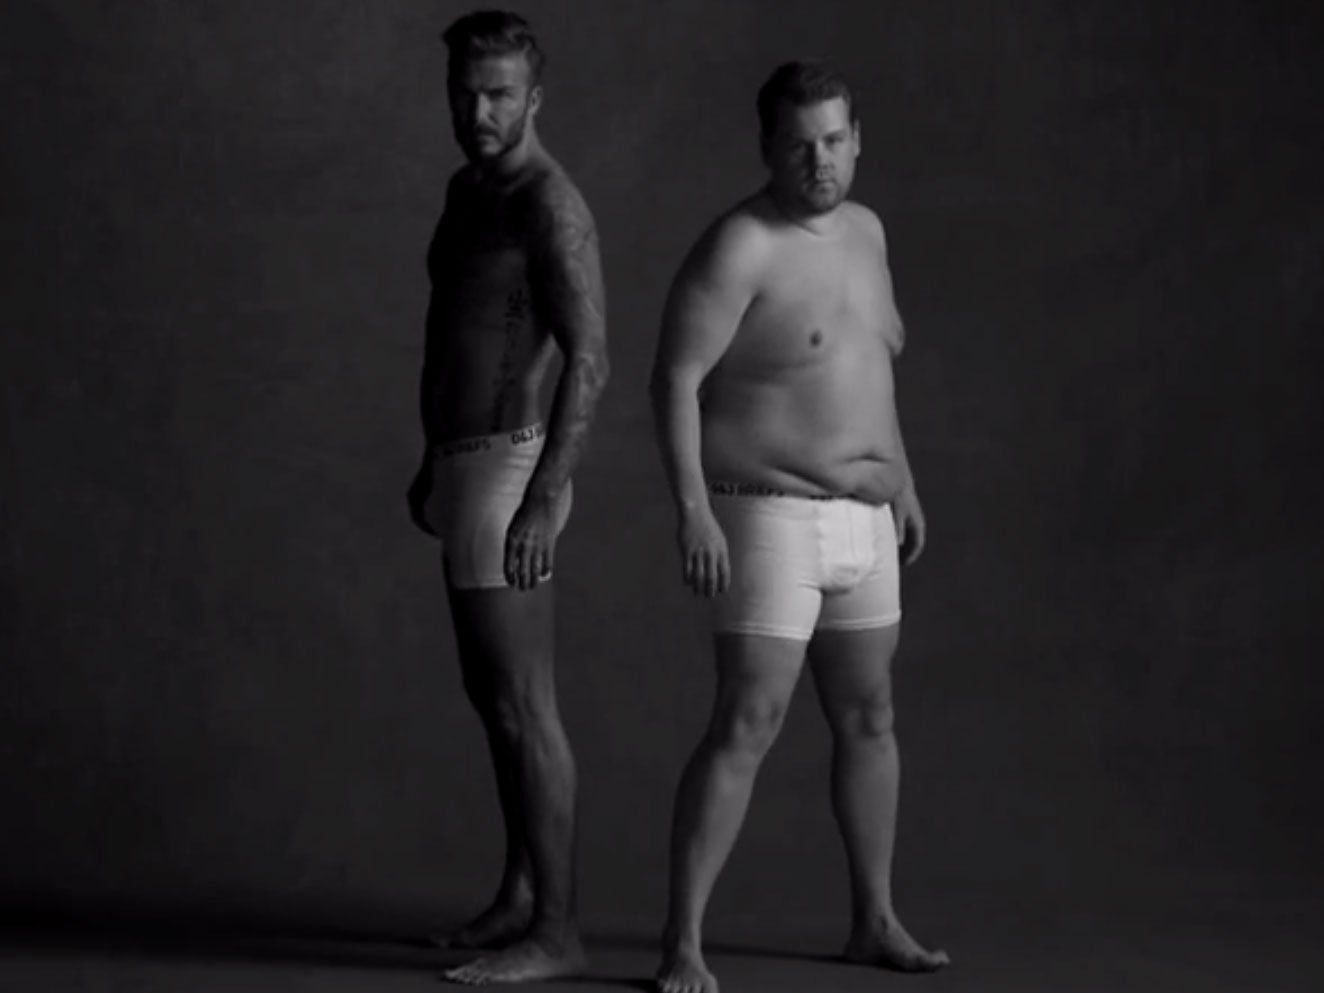 James Corden and David Beckham pose in their 'D&J Briefs' for The Late, Late Show